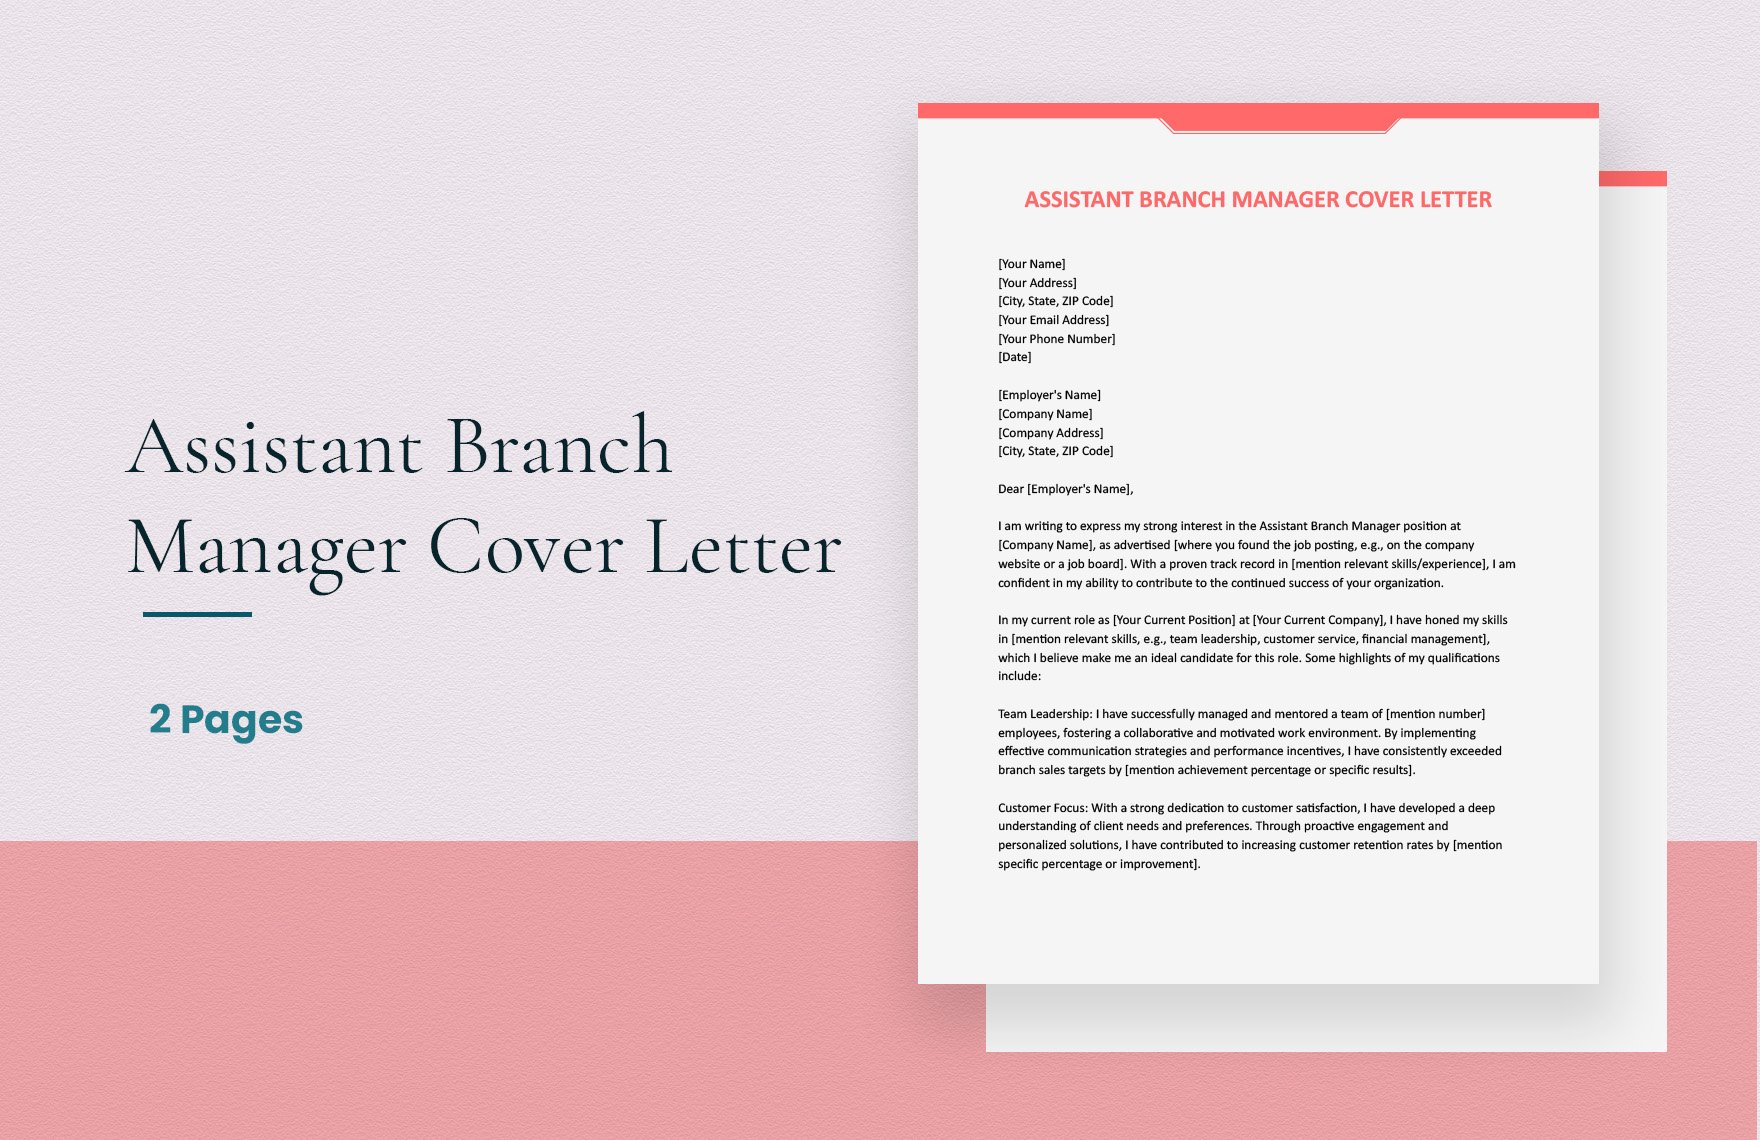 Assistant Branch Manager Cover Letter